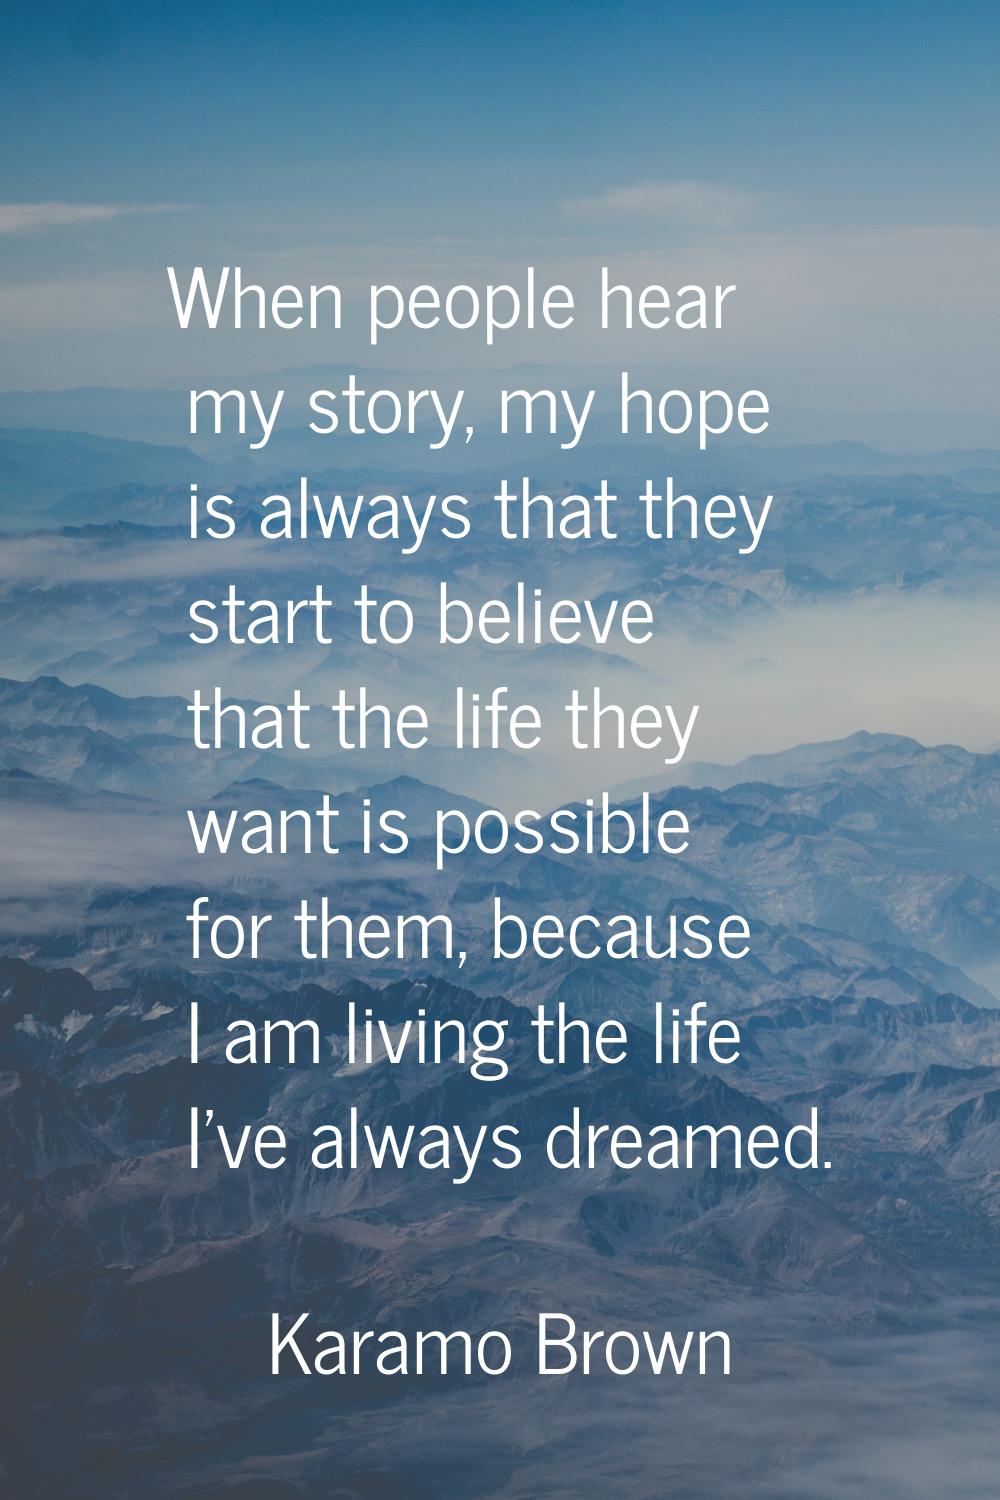 When people hear my story, my hope is always that they start to believe that the life they want is 